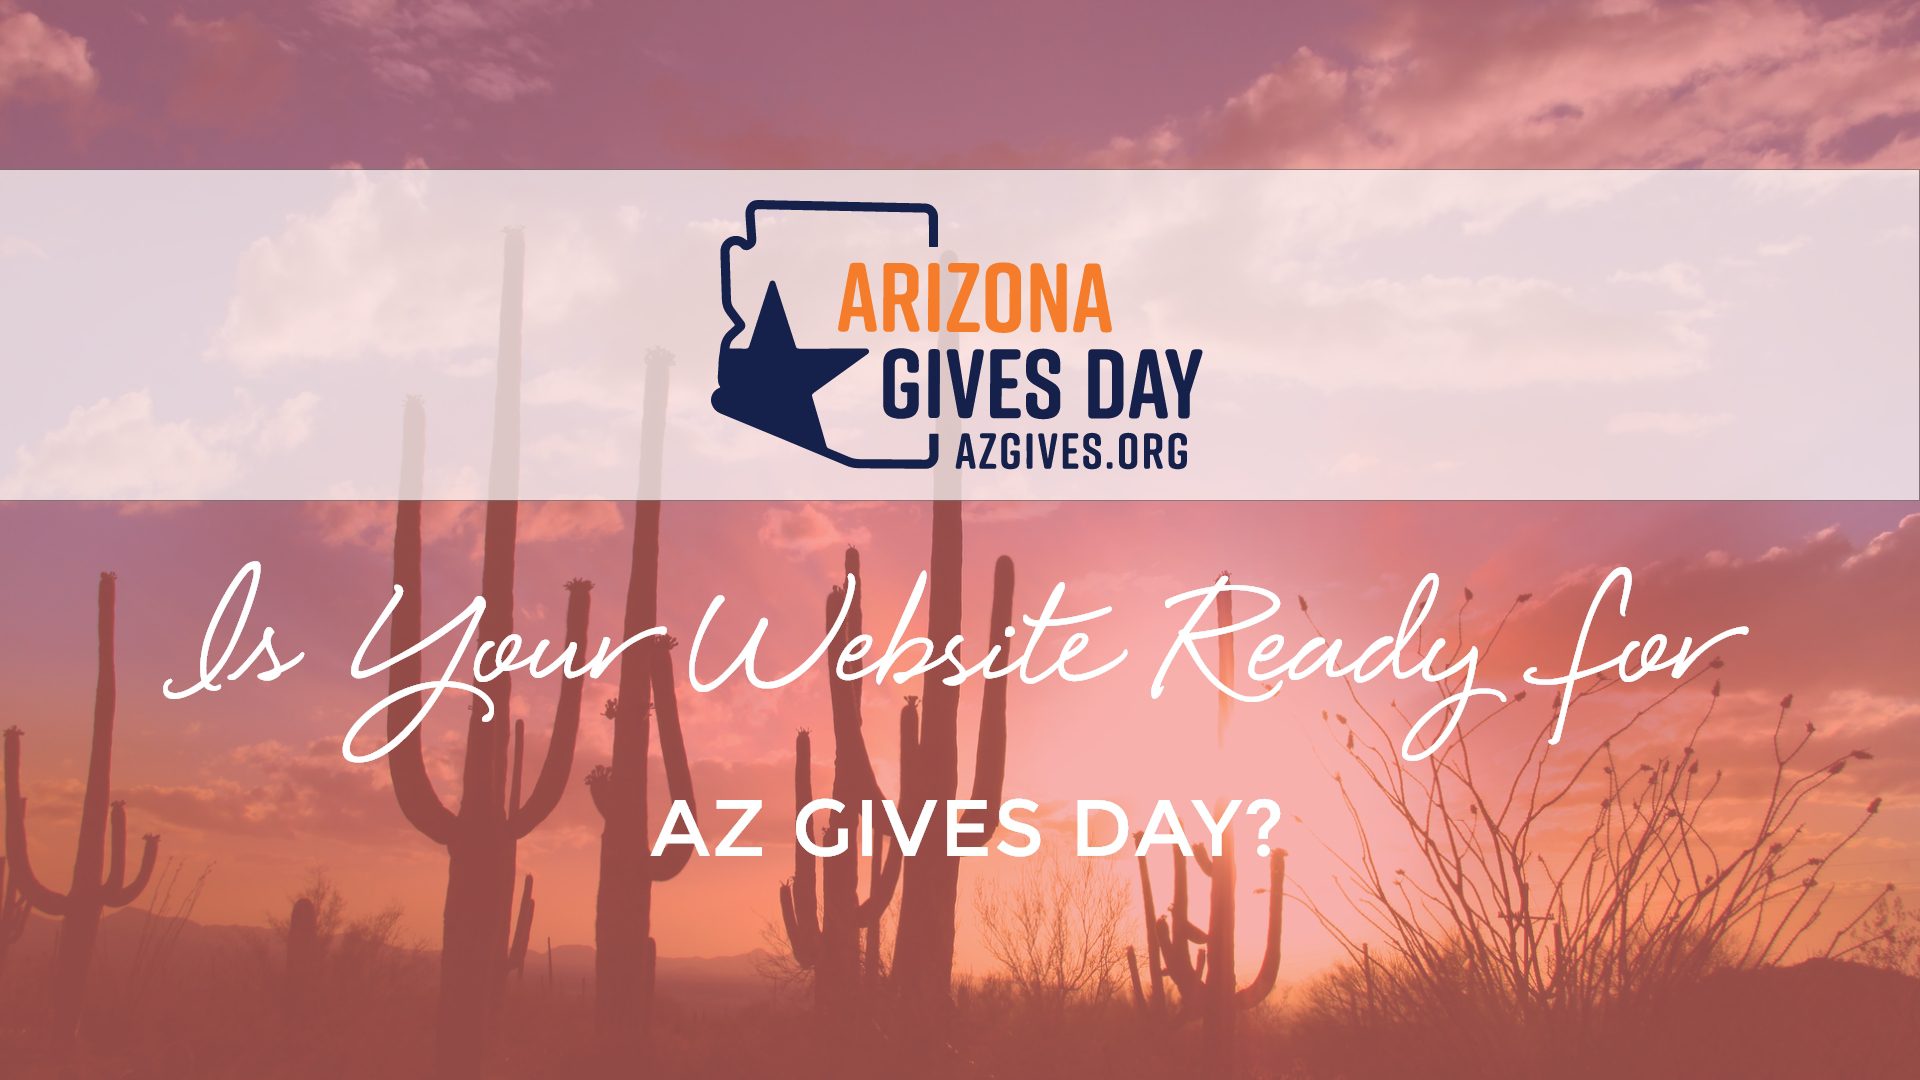 Is Your Website Ready for AZ Gives Day?" AZ Gives Day